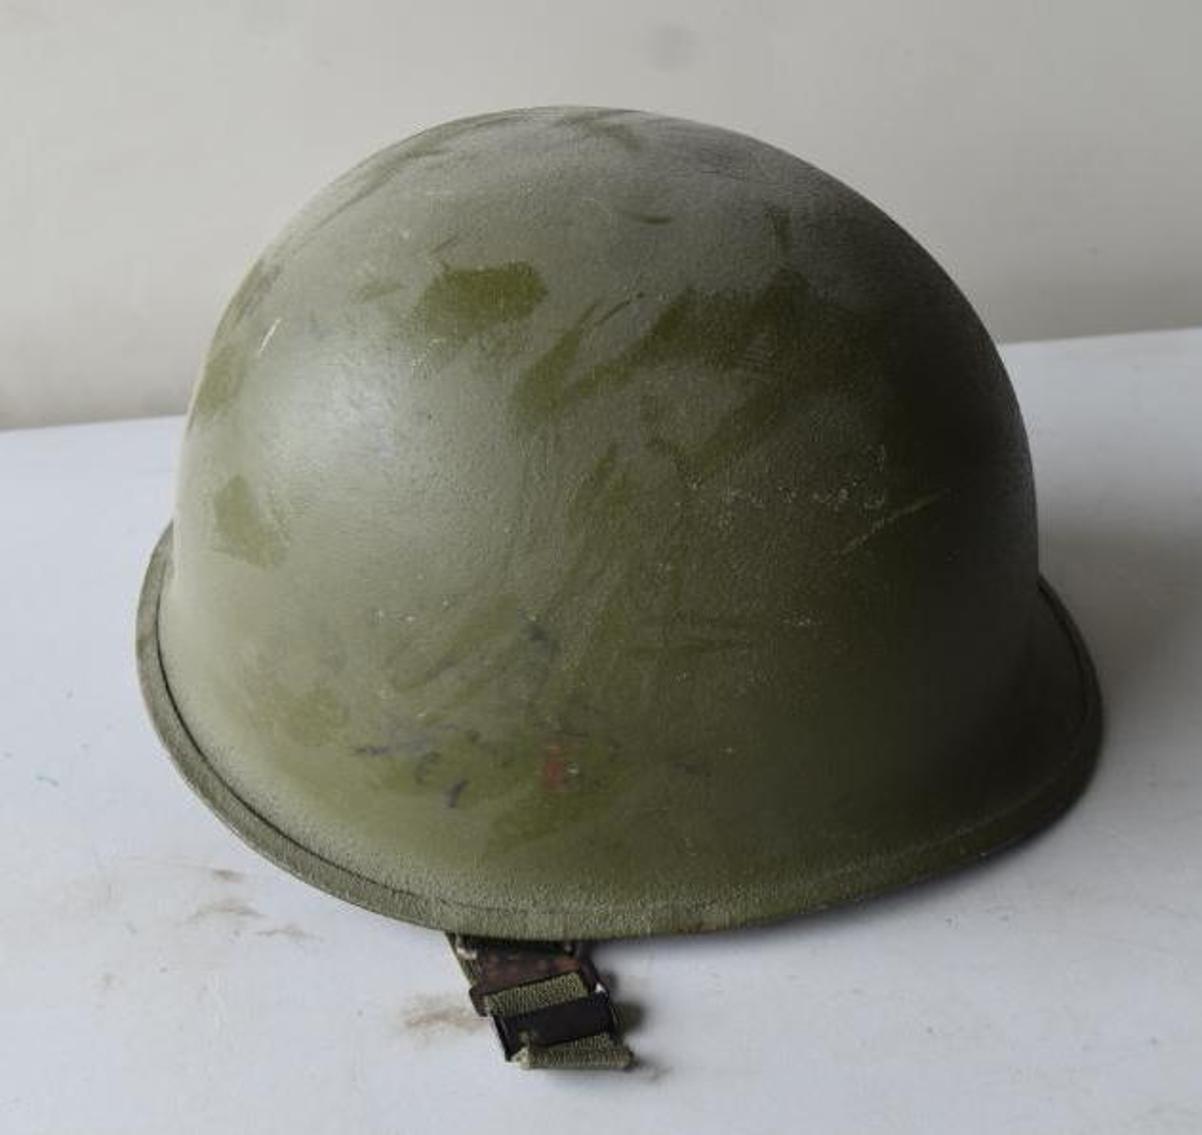 Private Collection of Vintage Military Memorabilia & Collectibles, Phase 4